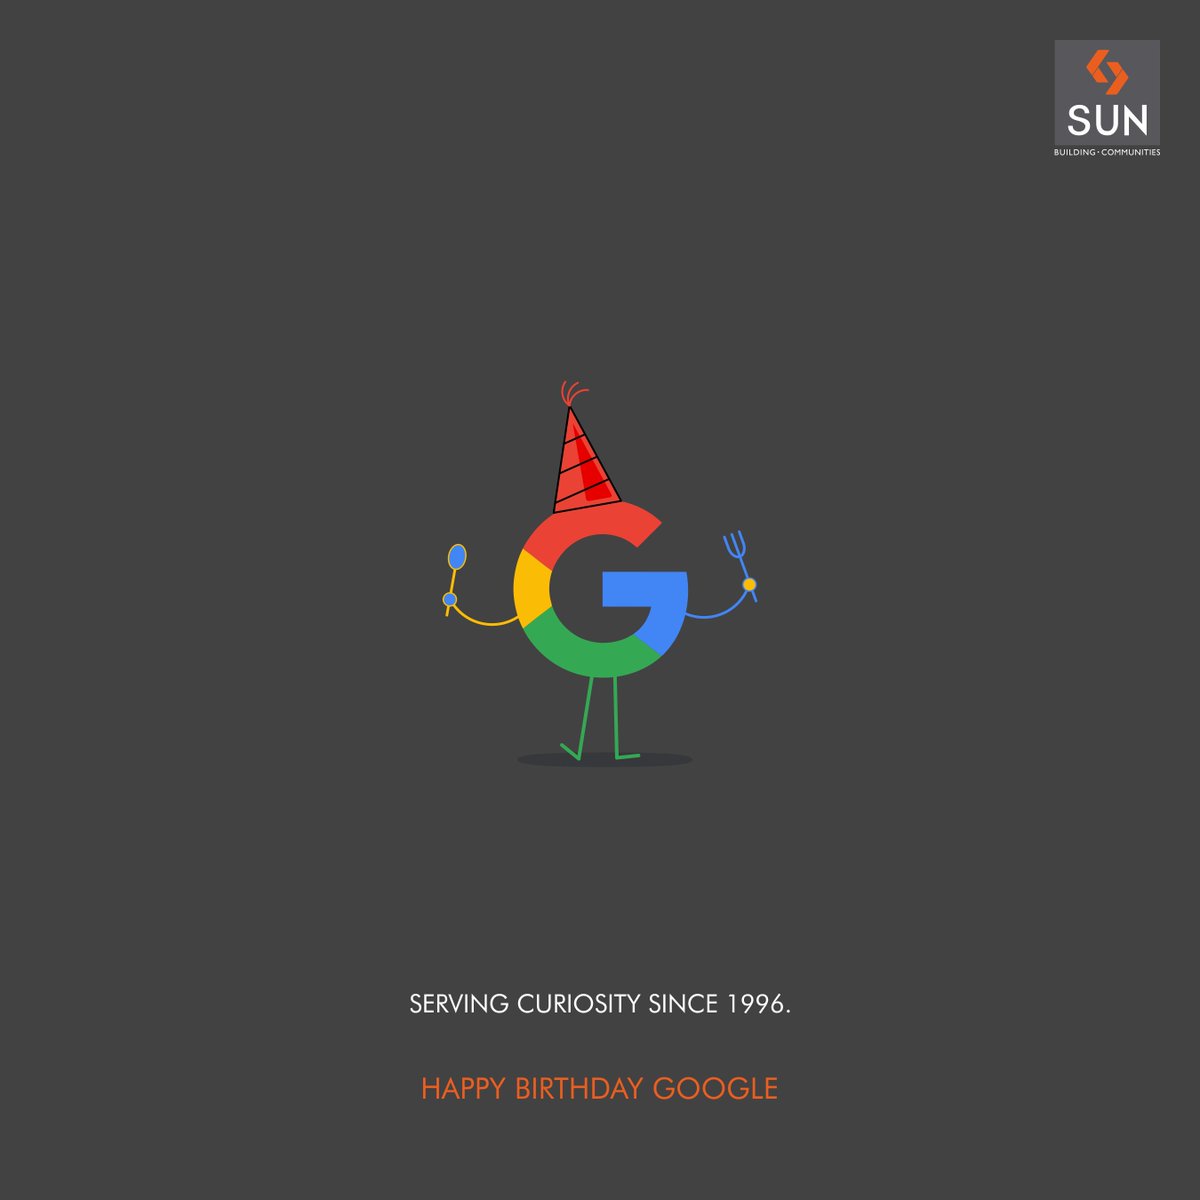 #Google is probably the only thing that can match a child's curiosity. 
#SunBuilders #HappyBirthdayGoogle https://t.co/ACBVrP6P5n